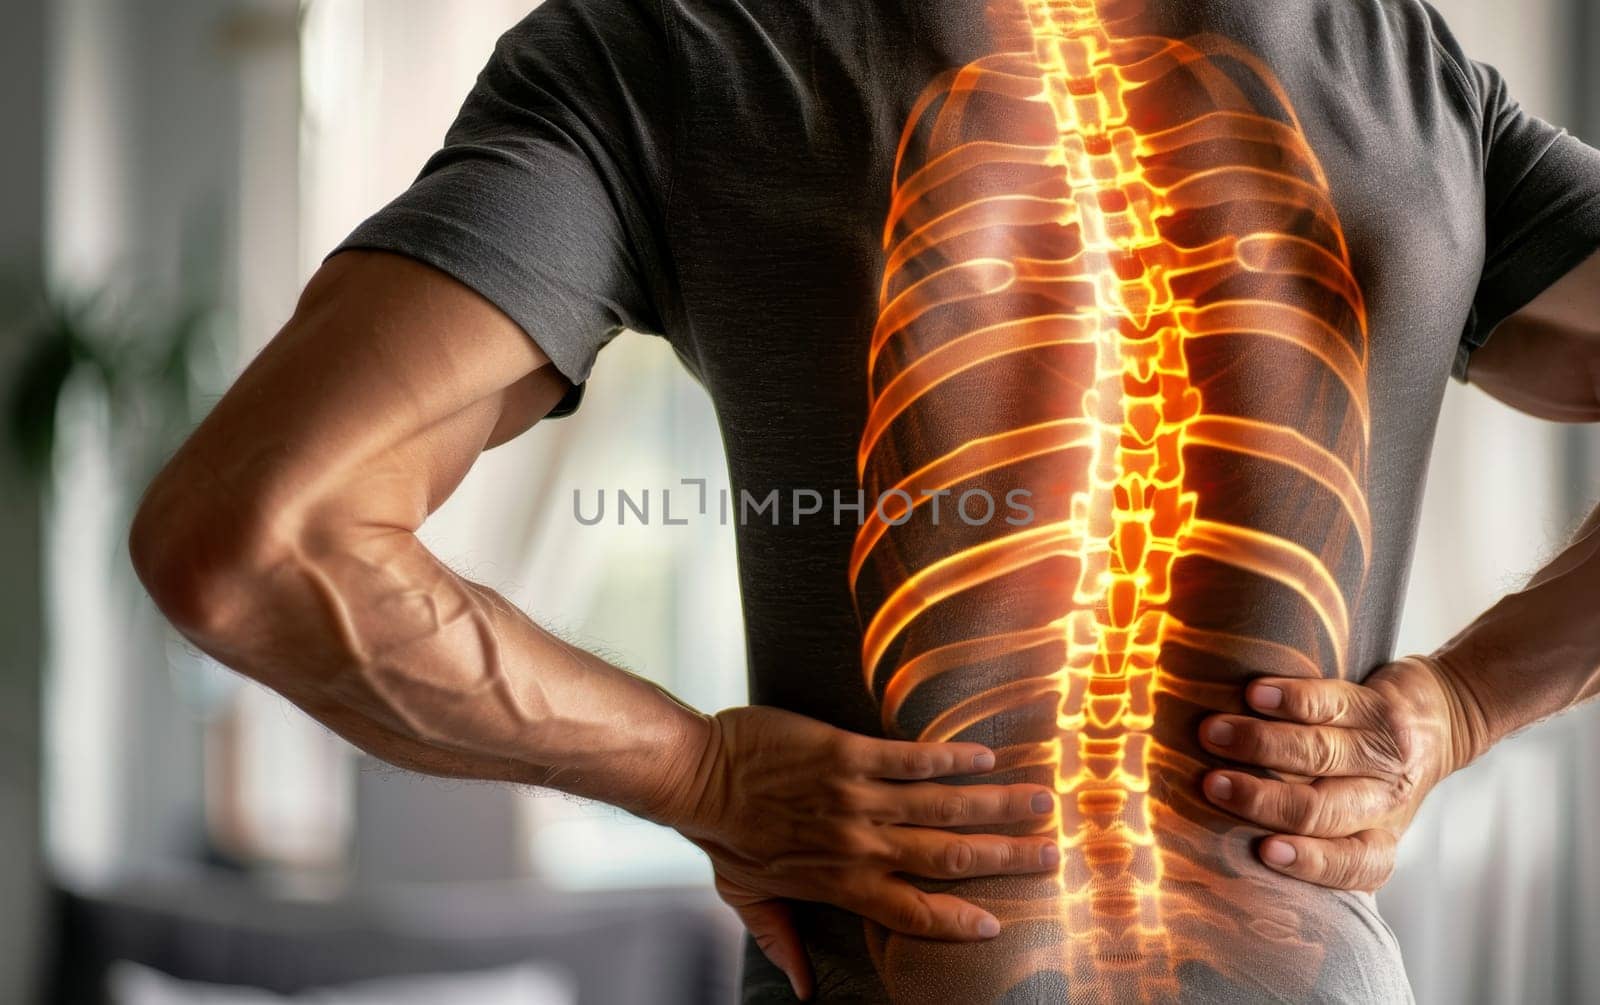 A man is clutching his lower back in pain, with a vivid illustration of a glowing spine superimposed to indicate discomfort. The image captures the struggle with back issues effectively